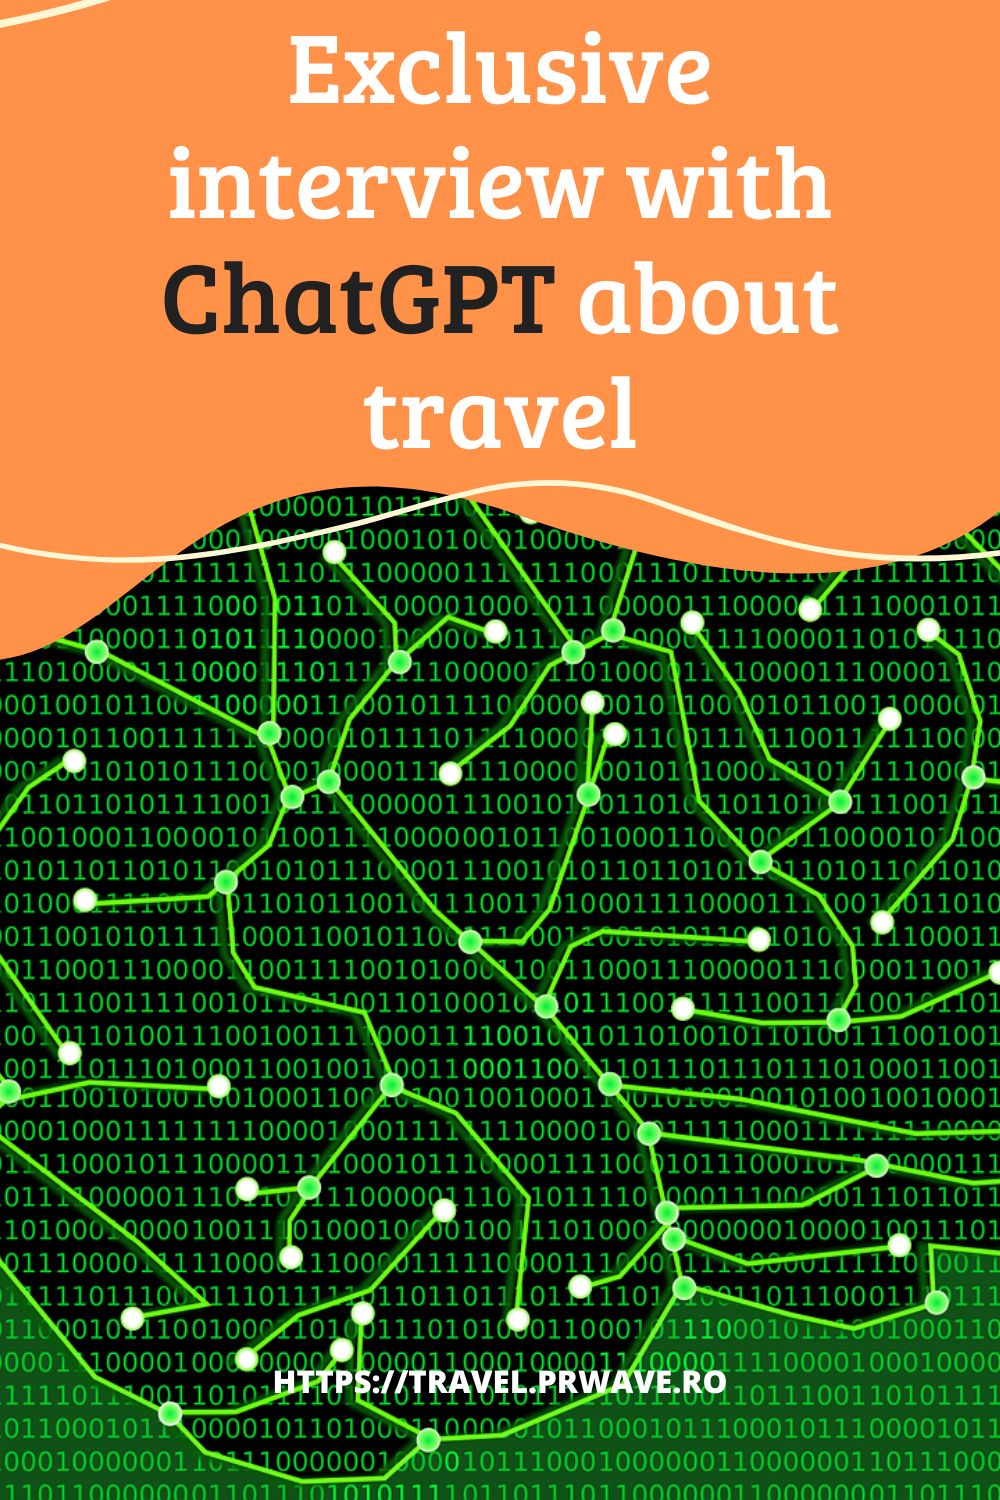 Exclusive interview with ChatGPT about travel: strange requests, jokes, trends, limits, benefits, and more #chatgpt #chatgptravel #ai #aitravel #chatgptinterview #chatgptdiscussion 